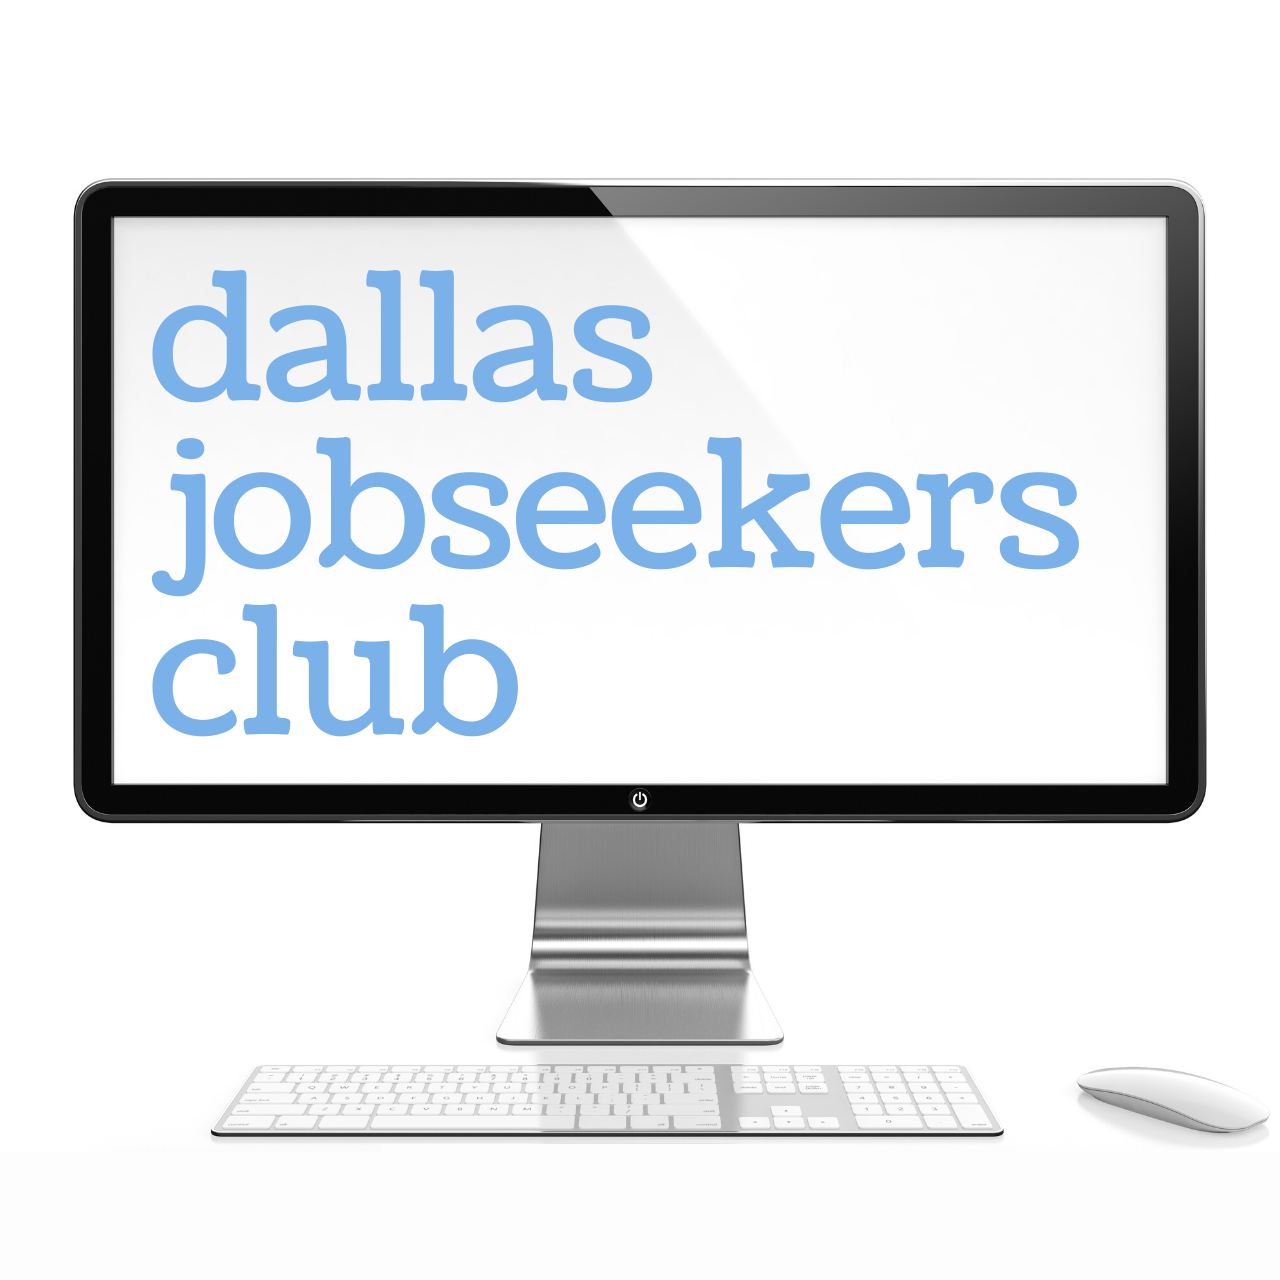 A computer screen displaying the words dallas jobseekers club